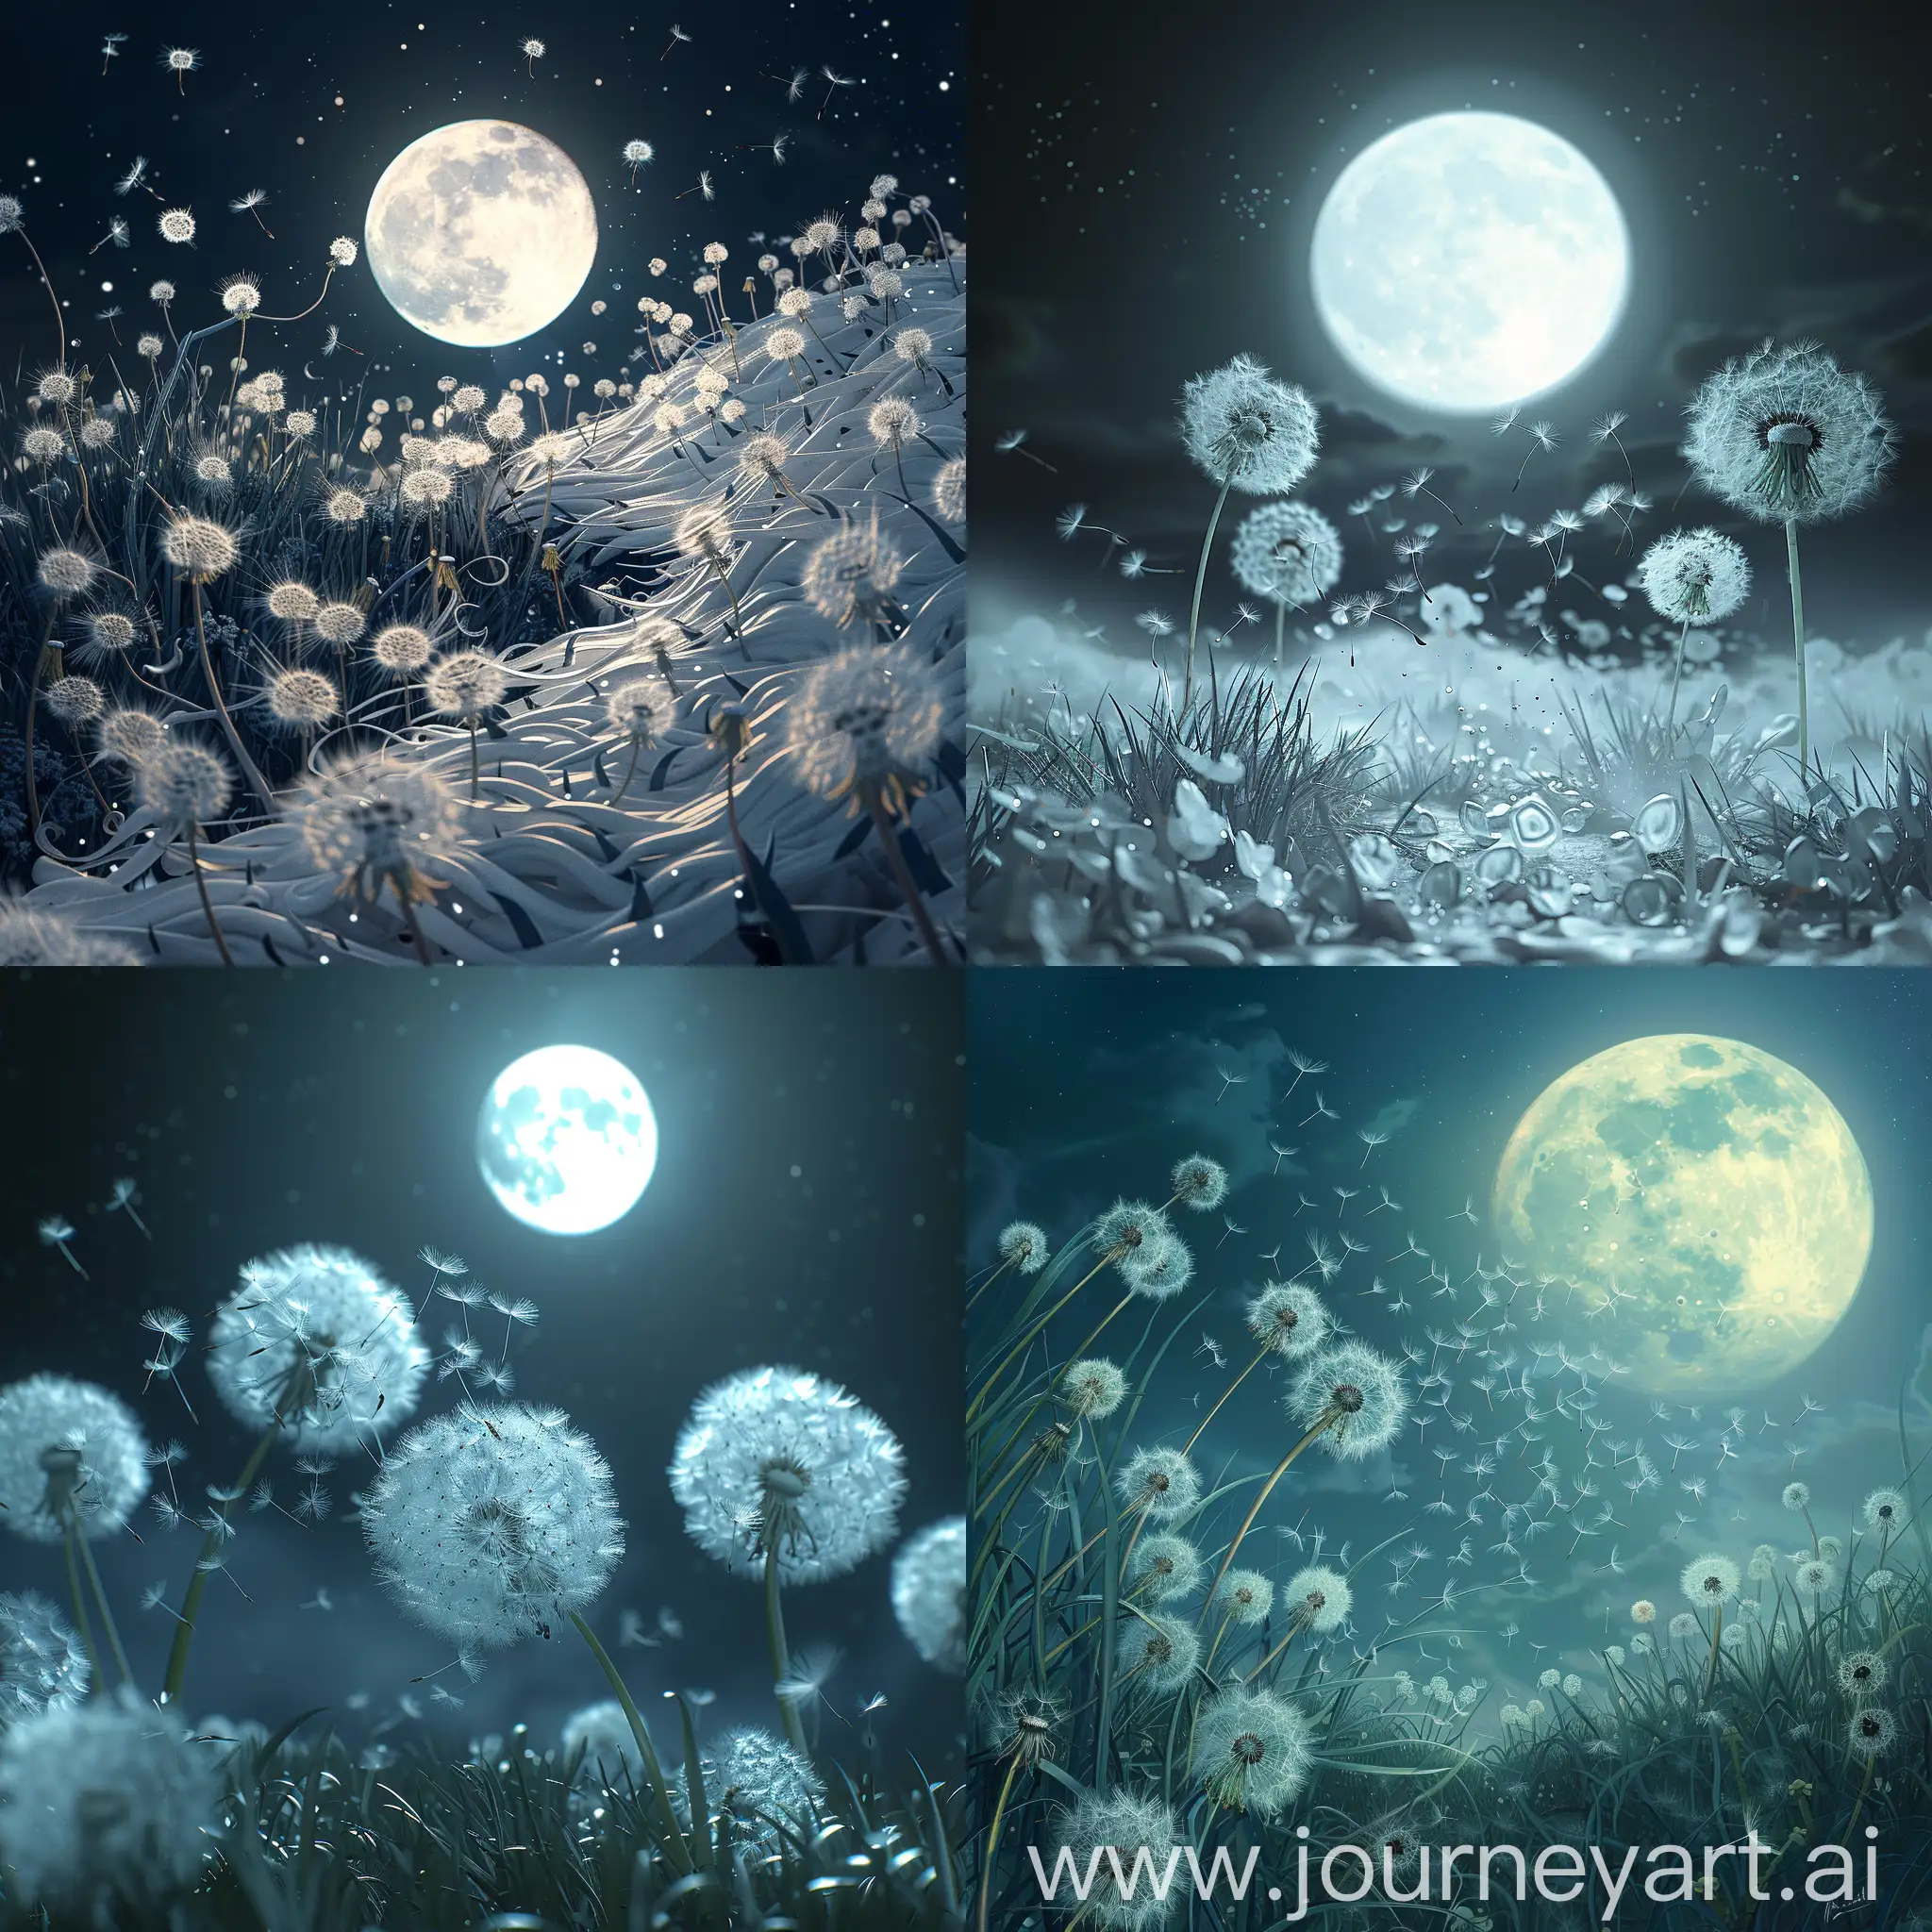 Moonlit-Dandelion-Field-with-Cracked-Glass-Effect